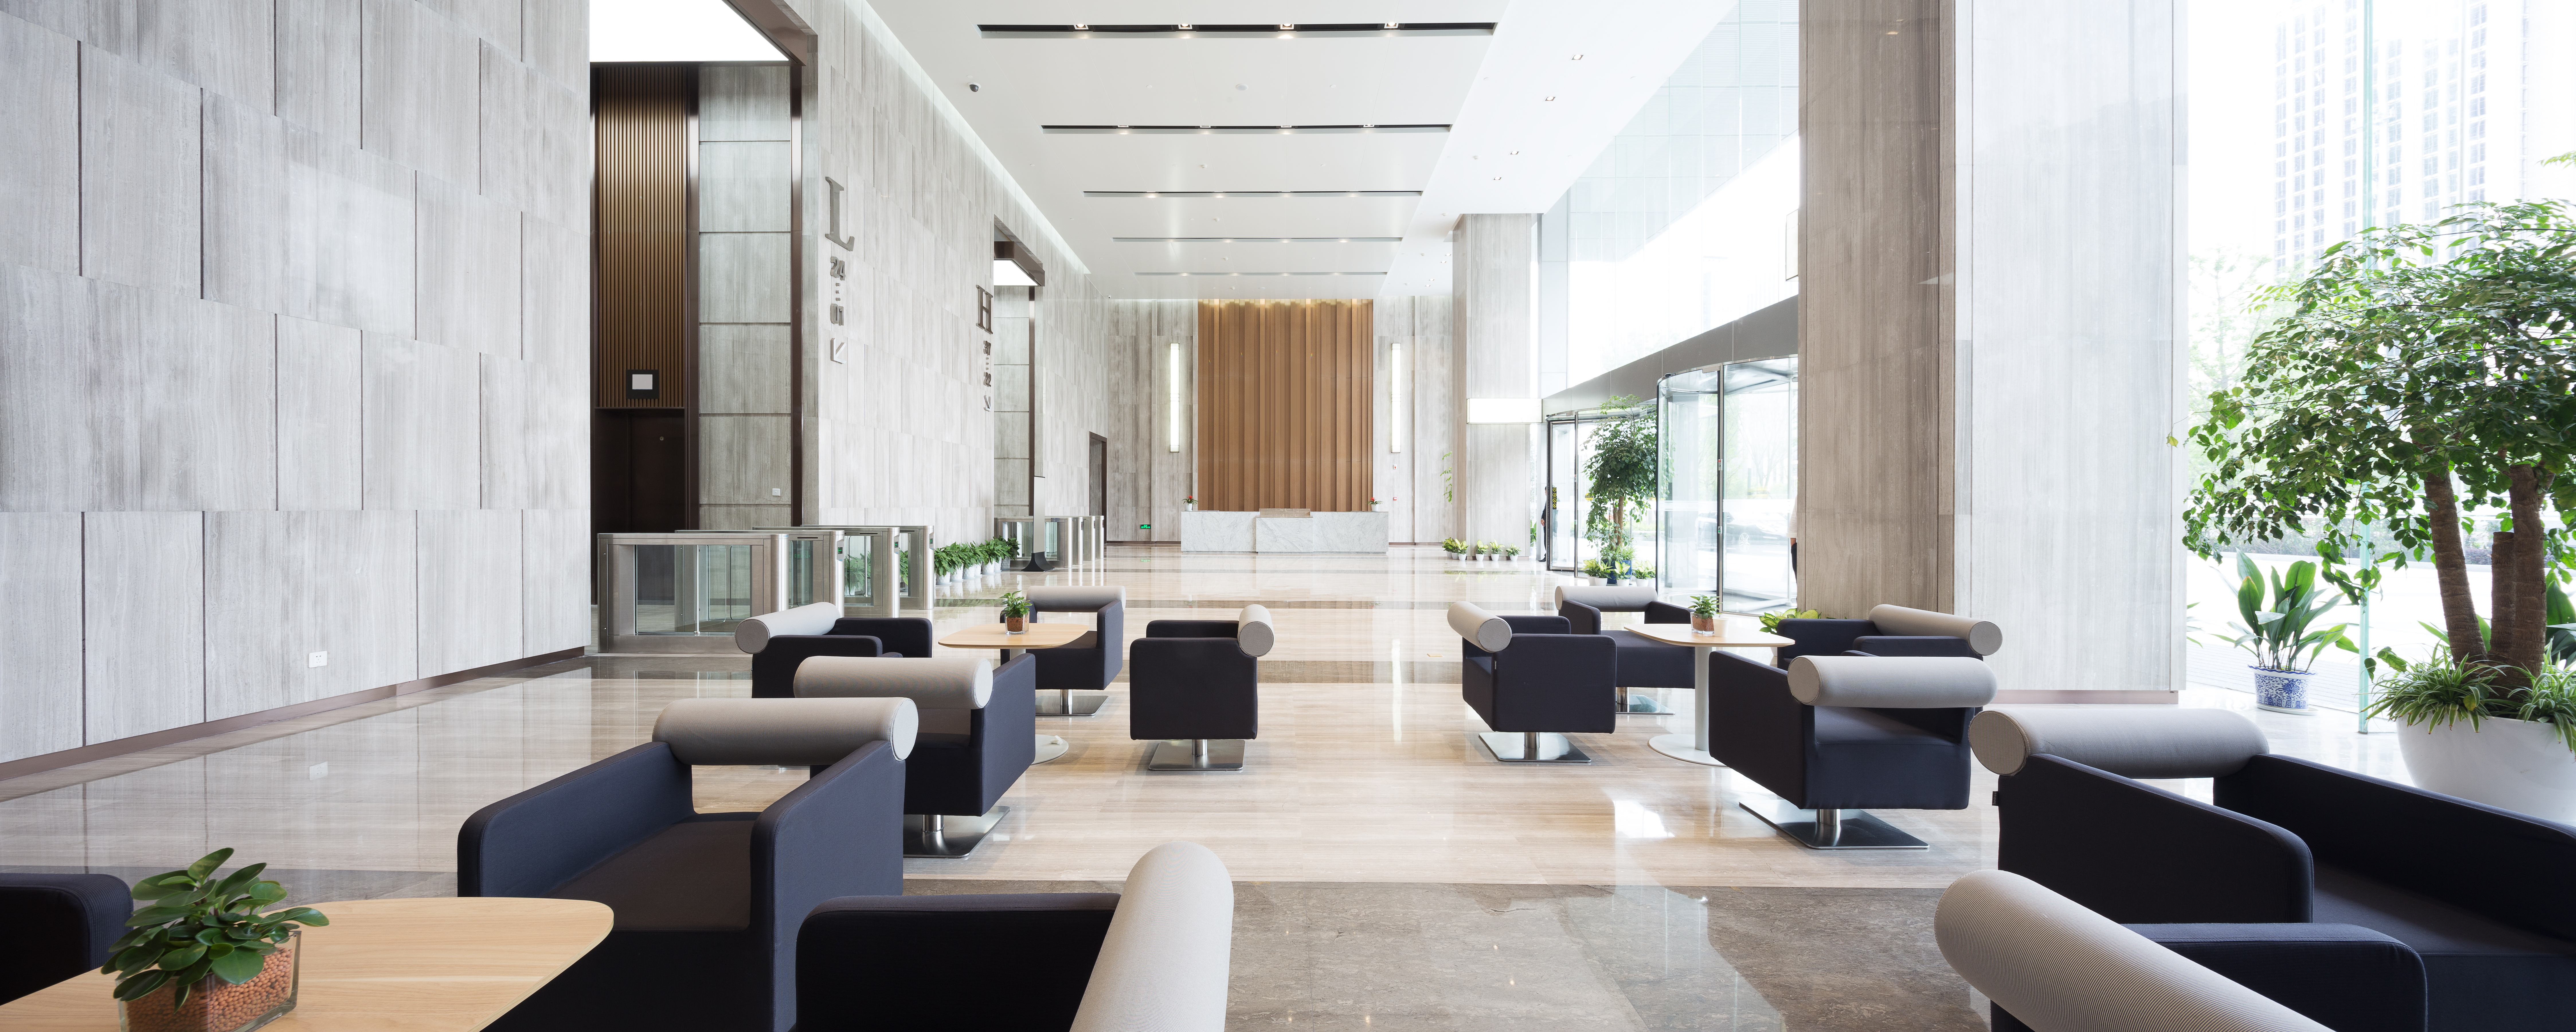 Clean and modern lobby of an office building 